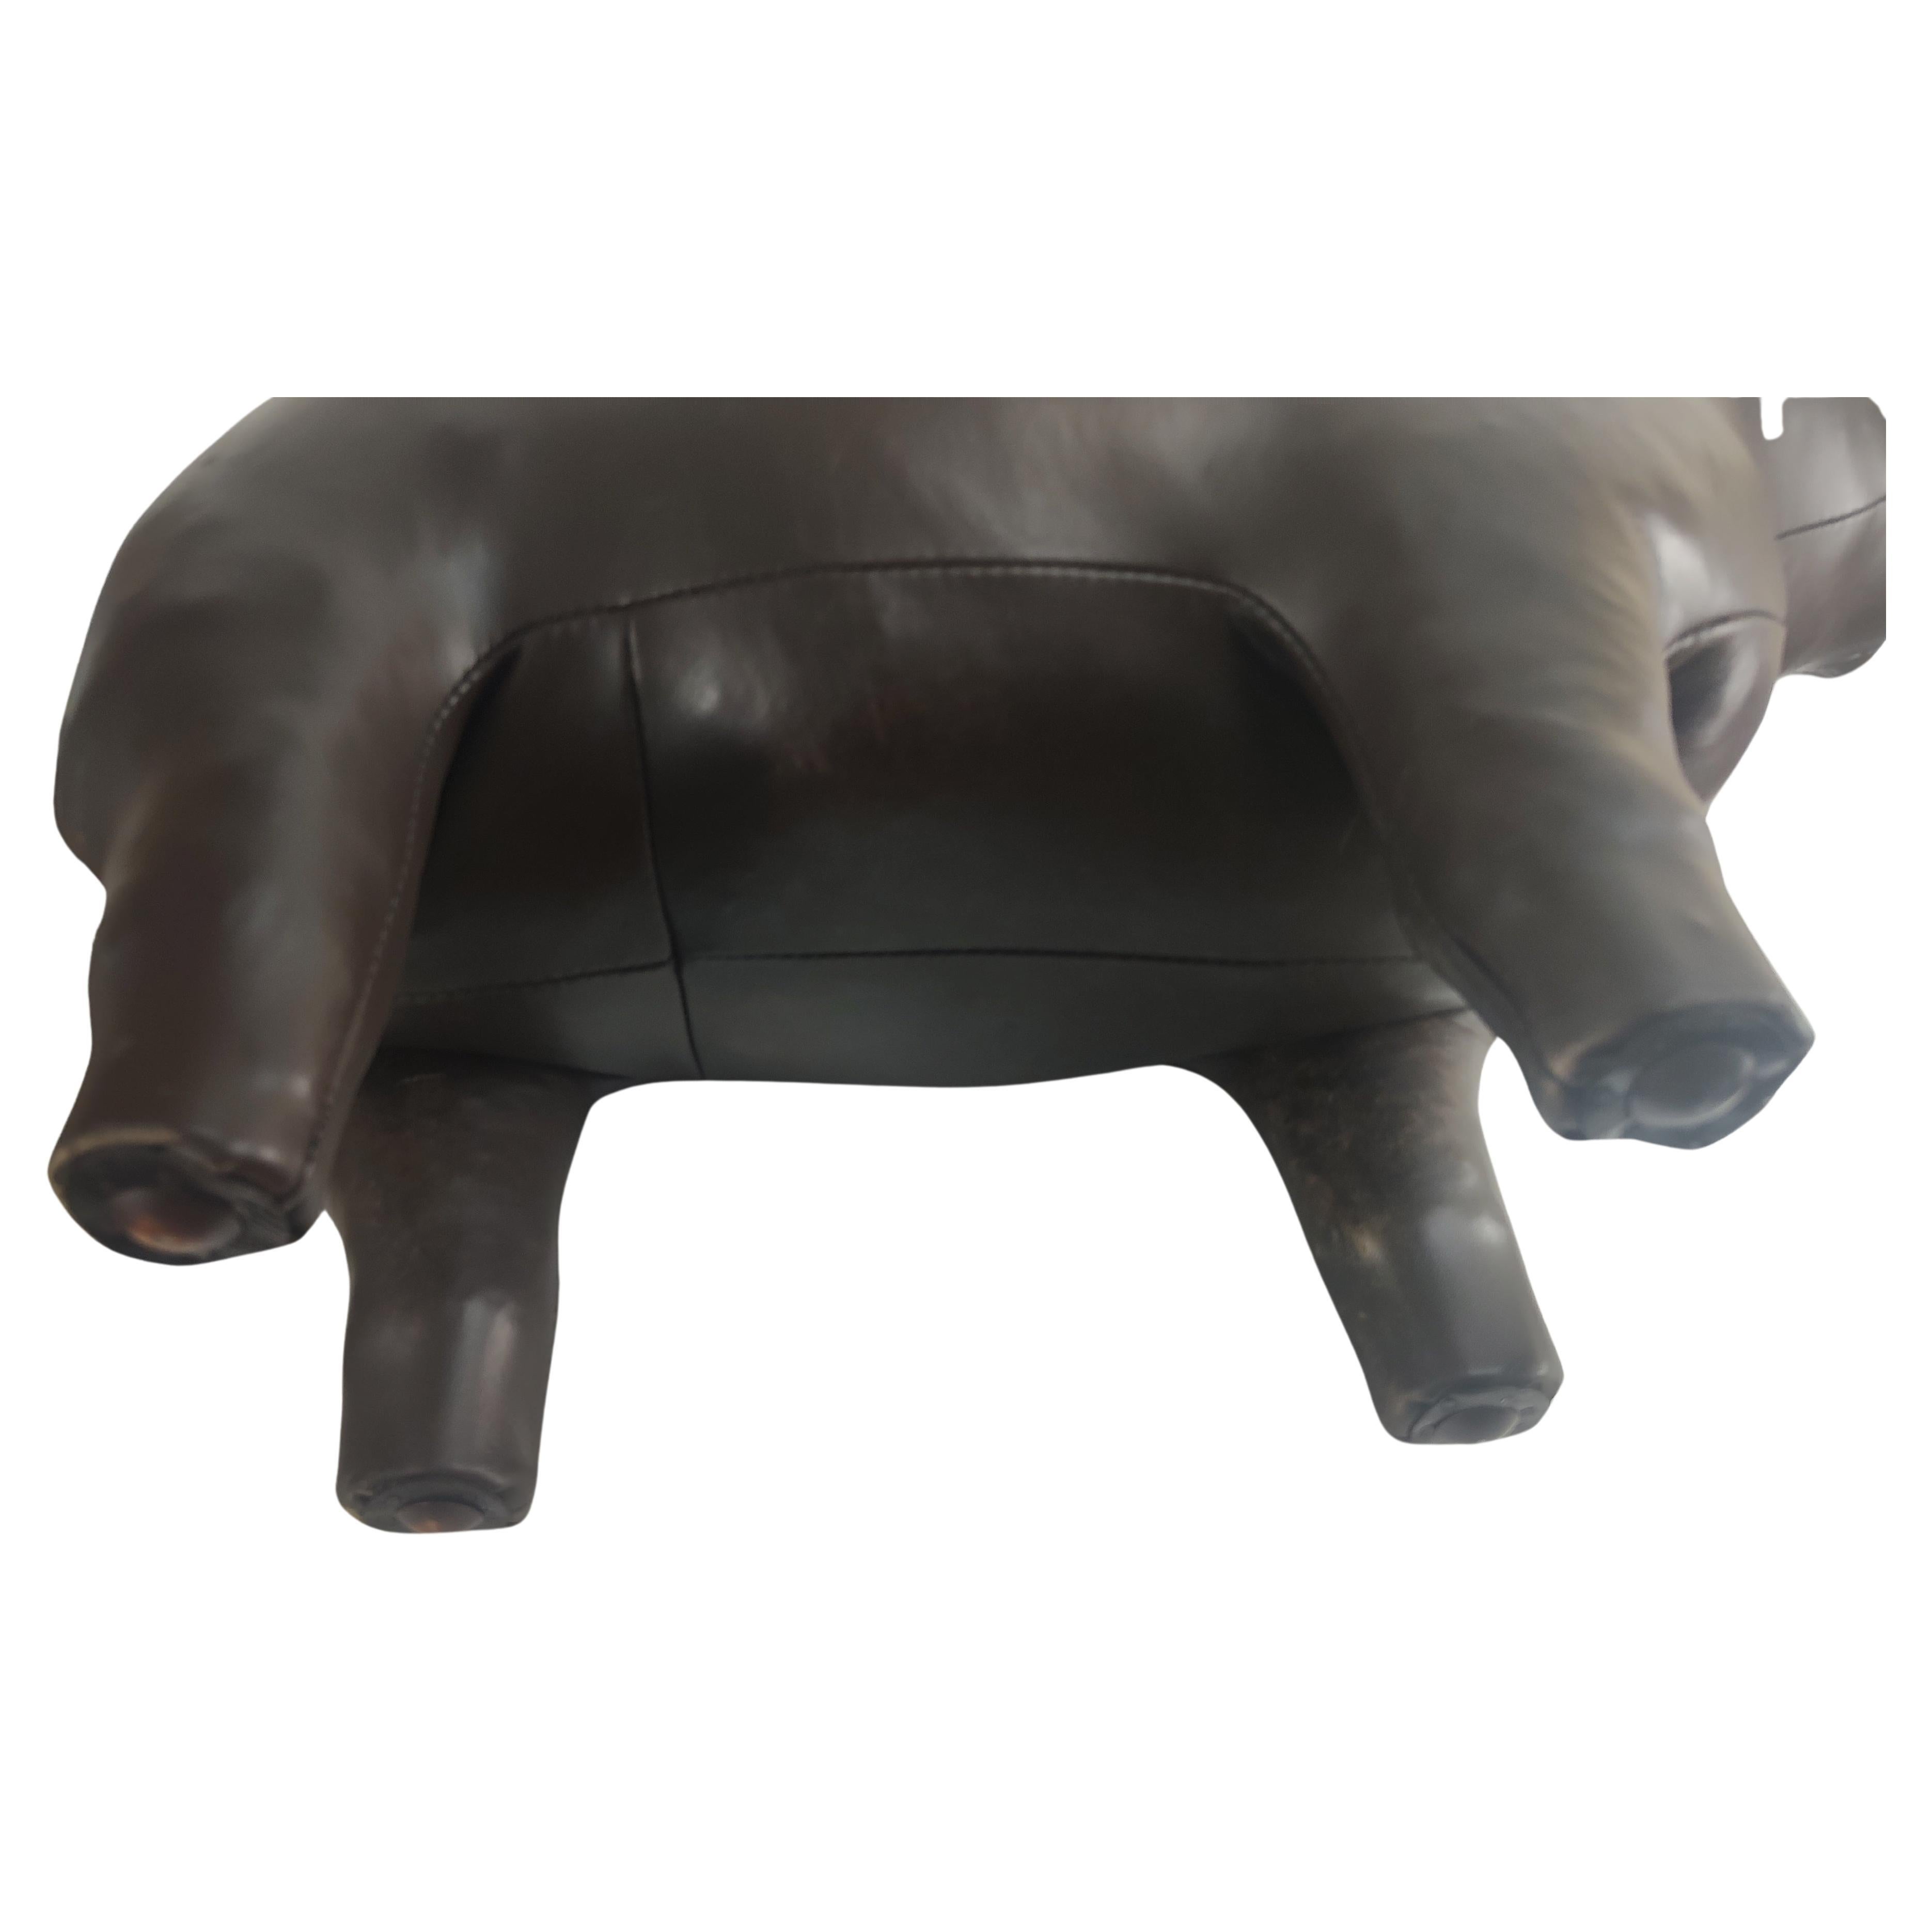 Mid Century Modern Sculptural Leather Bulldog Ottoman by Abercrombie & Fitch  In Good Condition For Sale In Port Jervis, NY